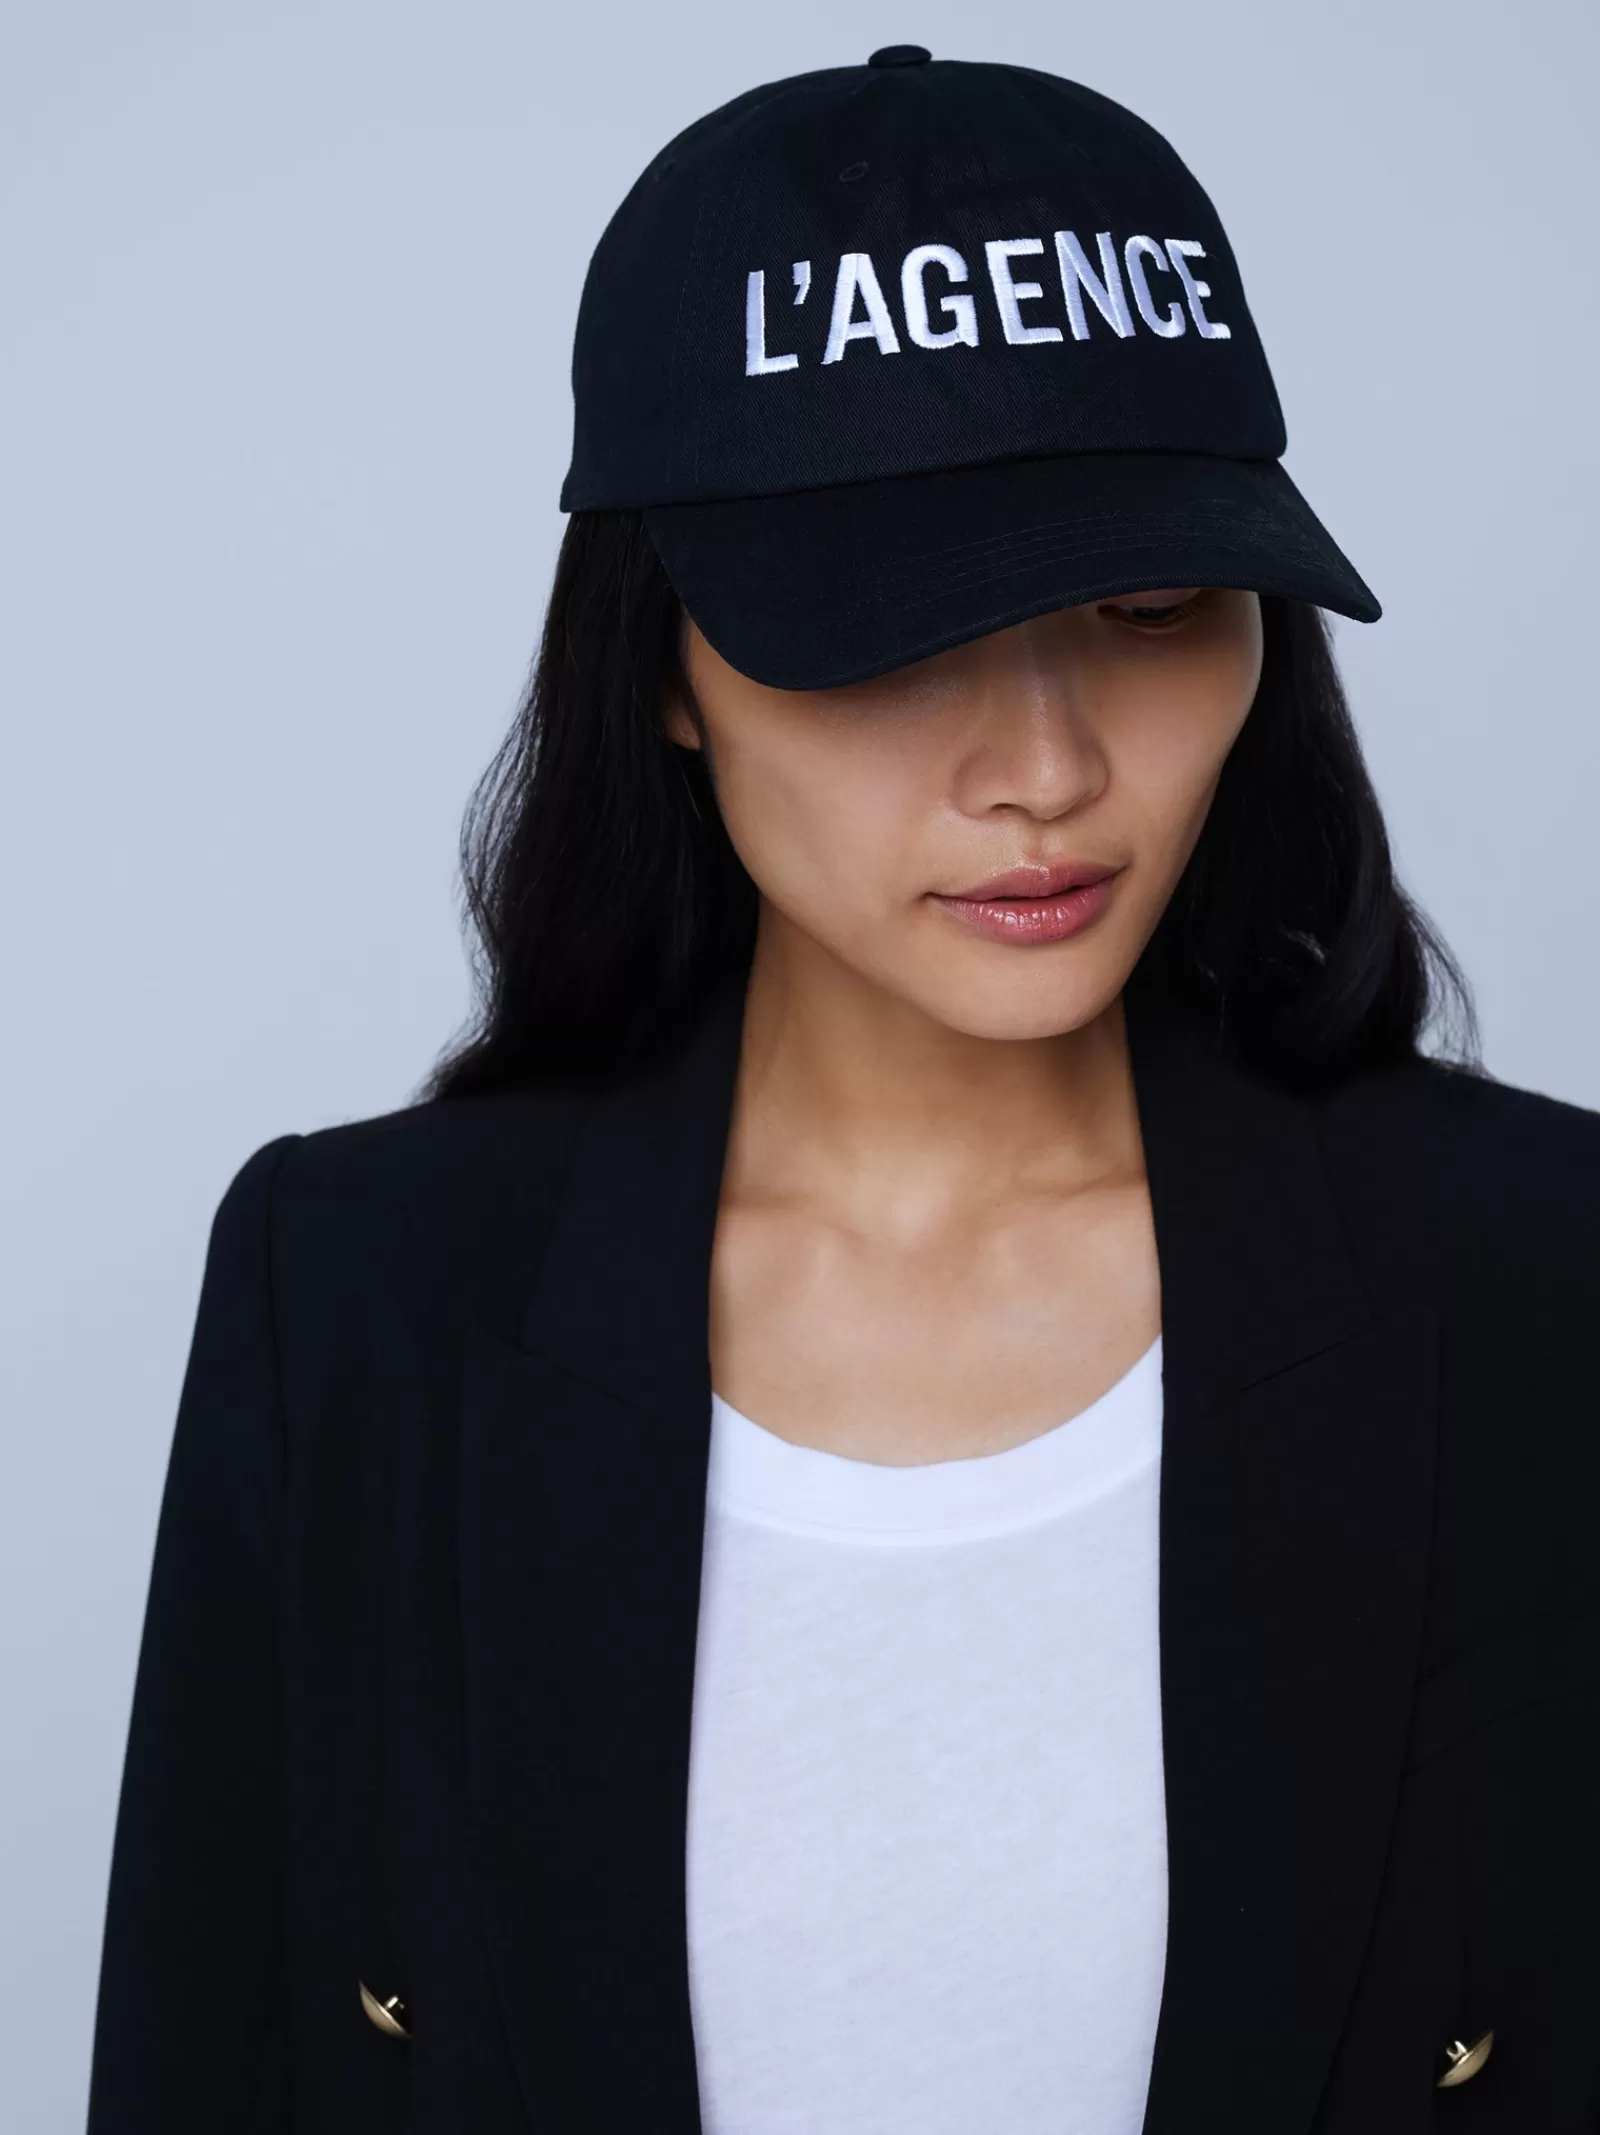 L'AGENCE Baseball Cap< Accessories | All Things Black